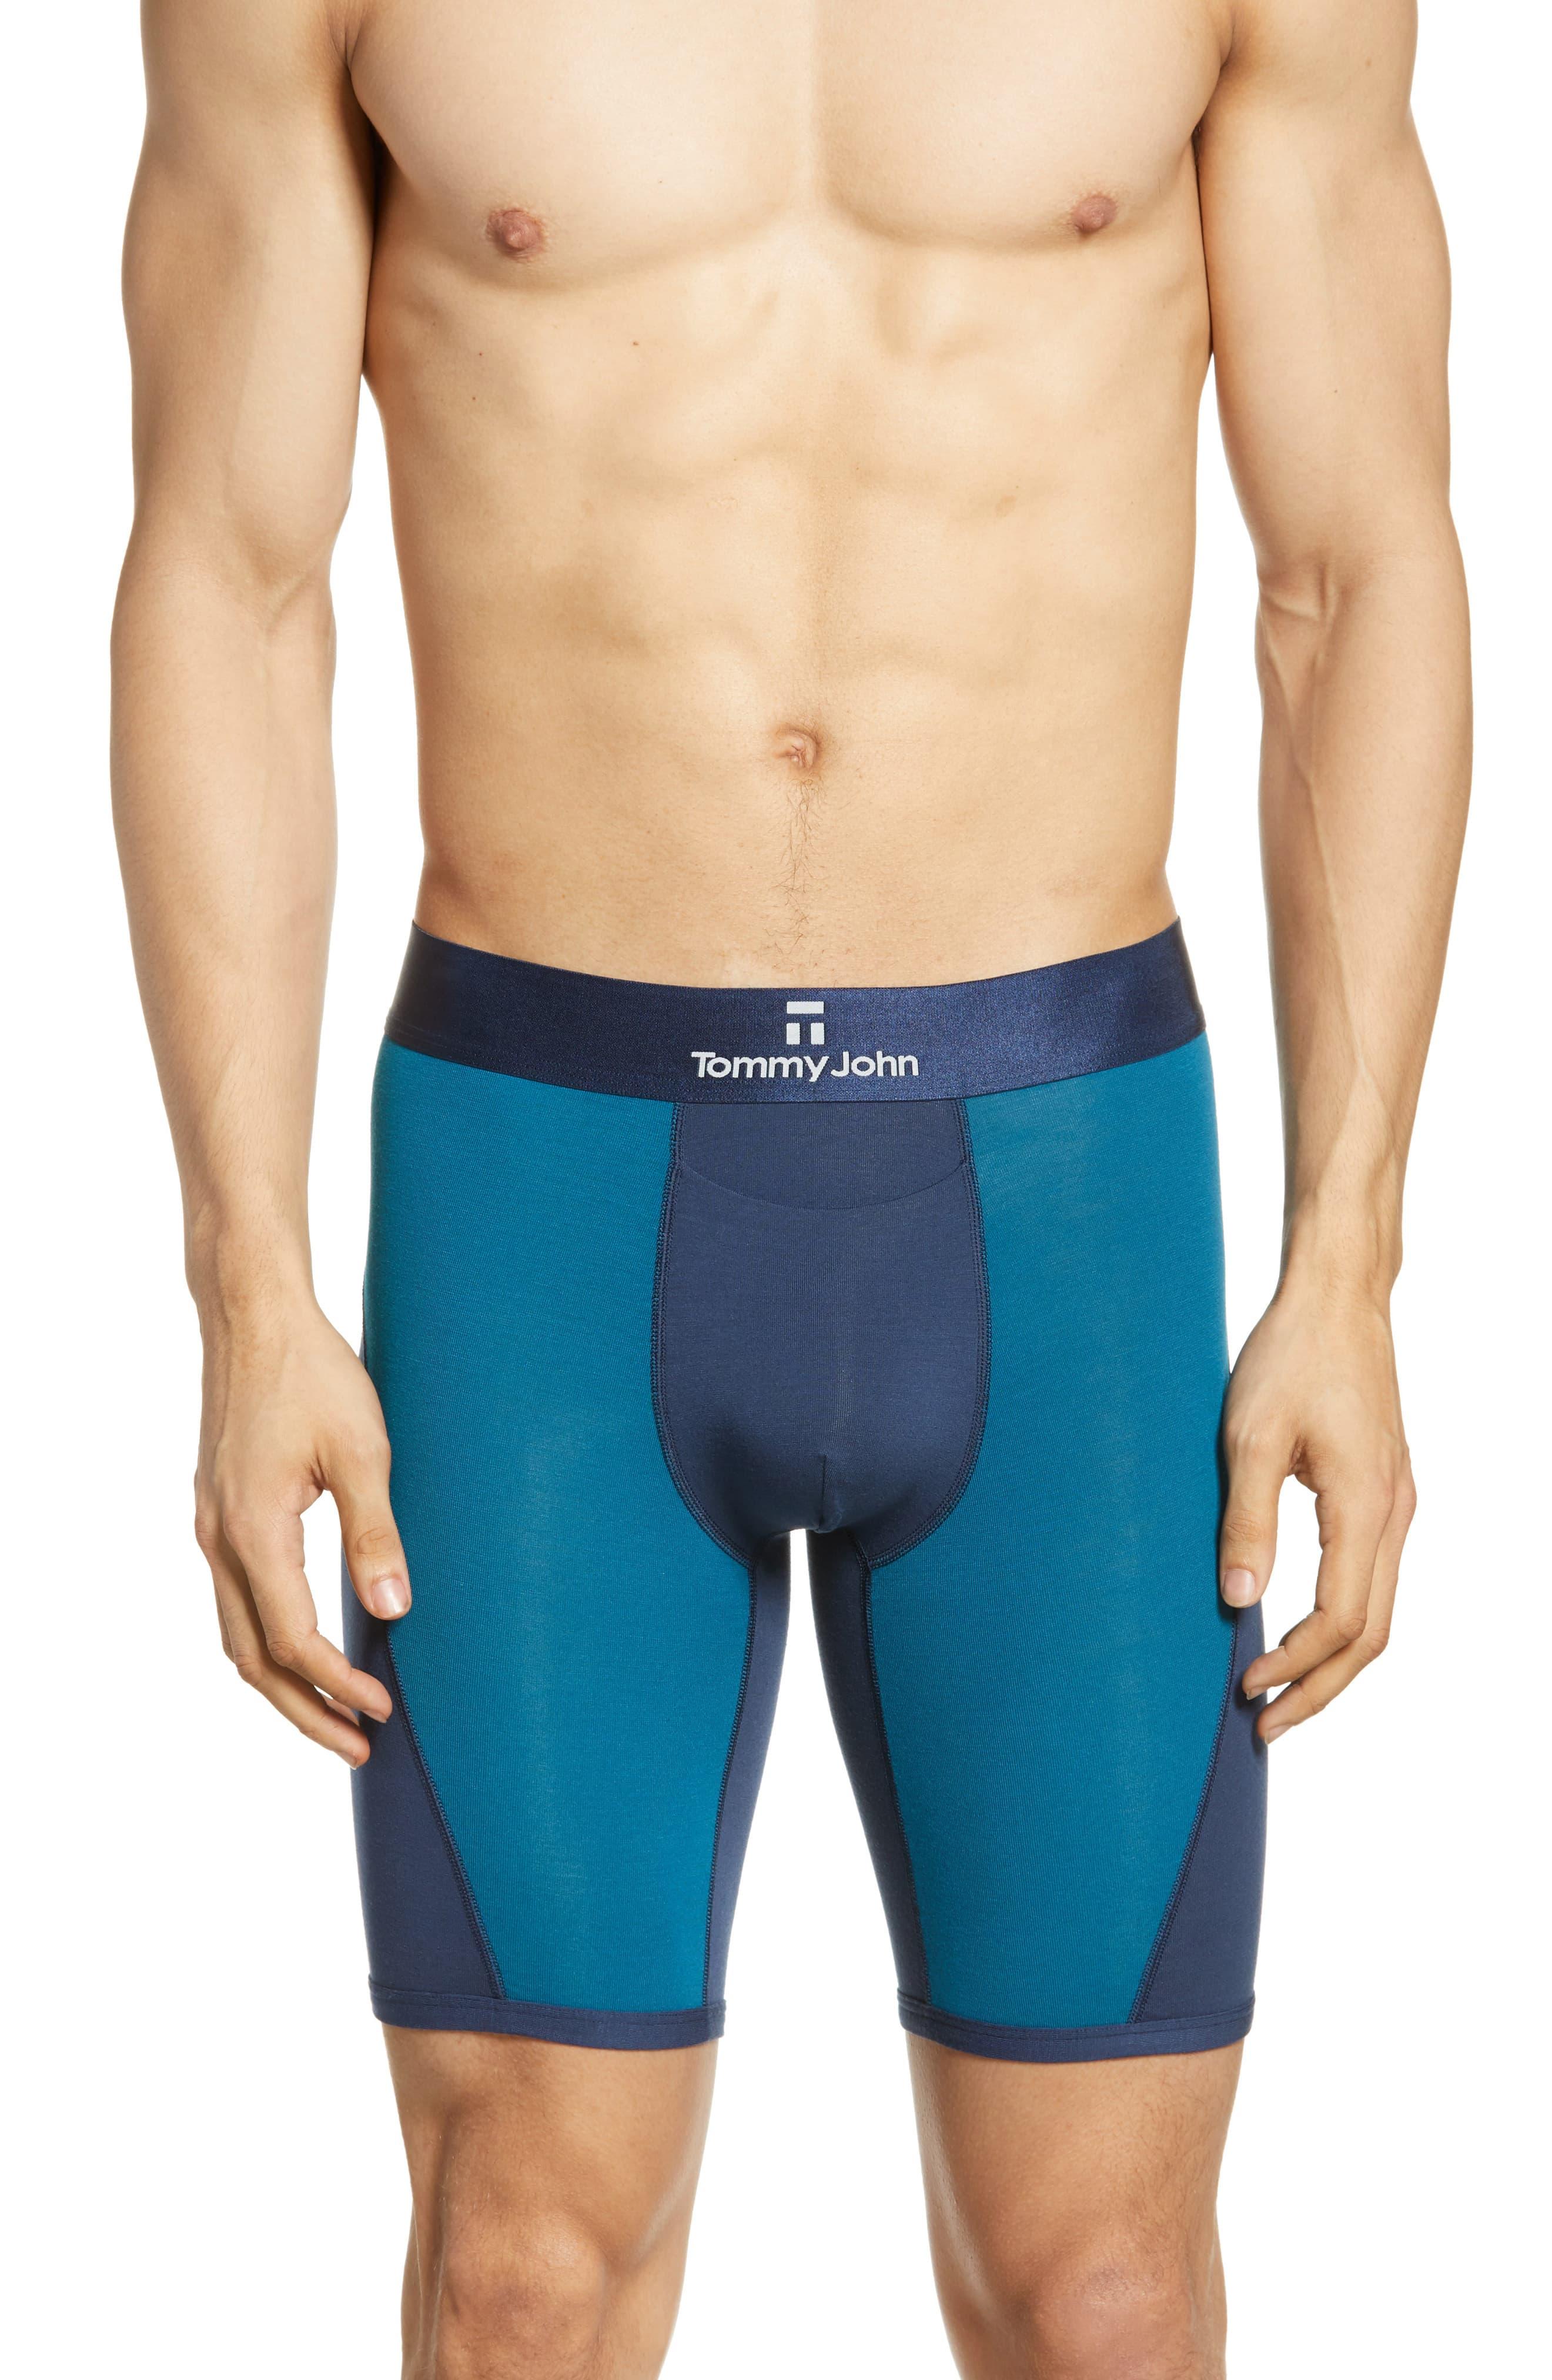 Tommy John Second Skin Wave Colorblock Boxer Briefs in Blue for Men - Lyst